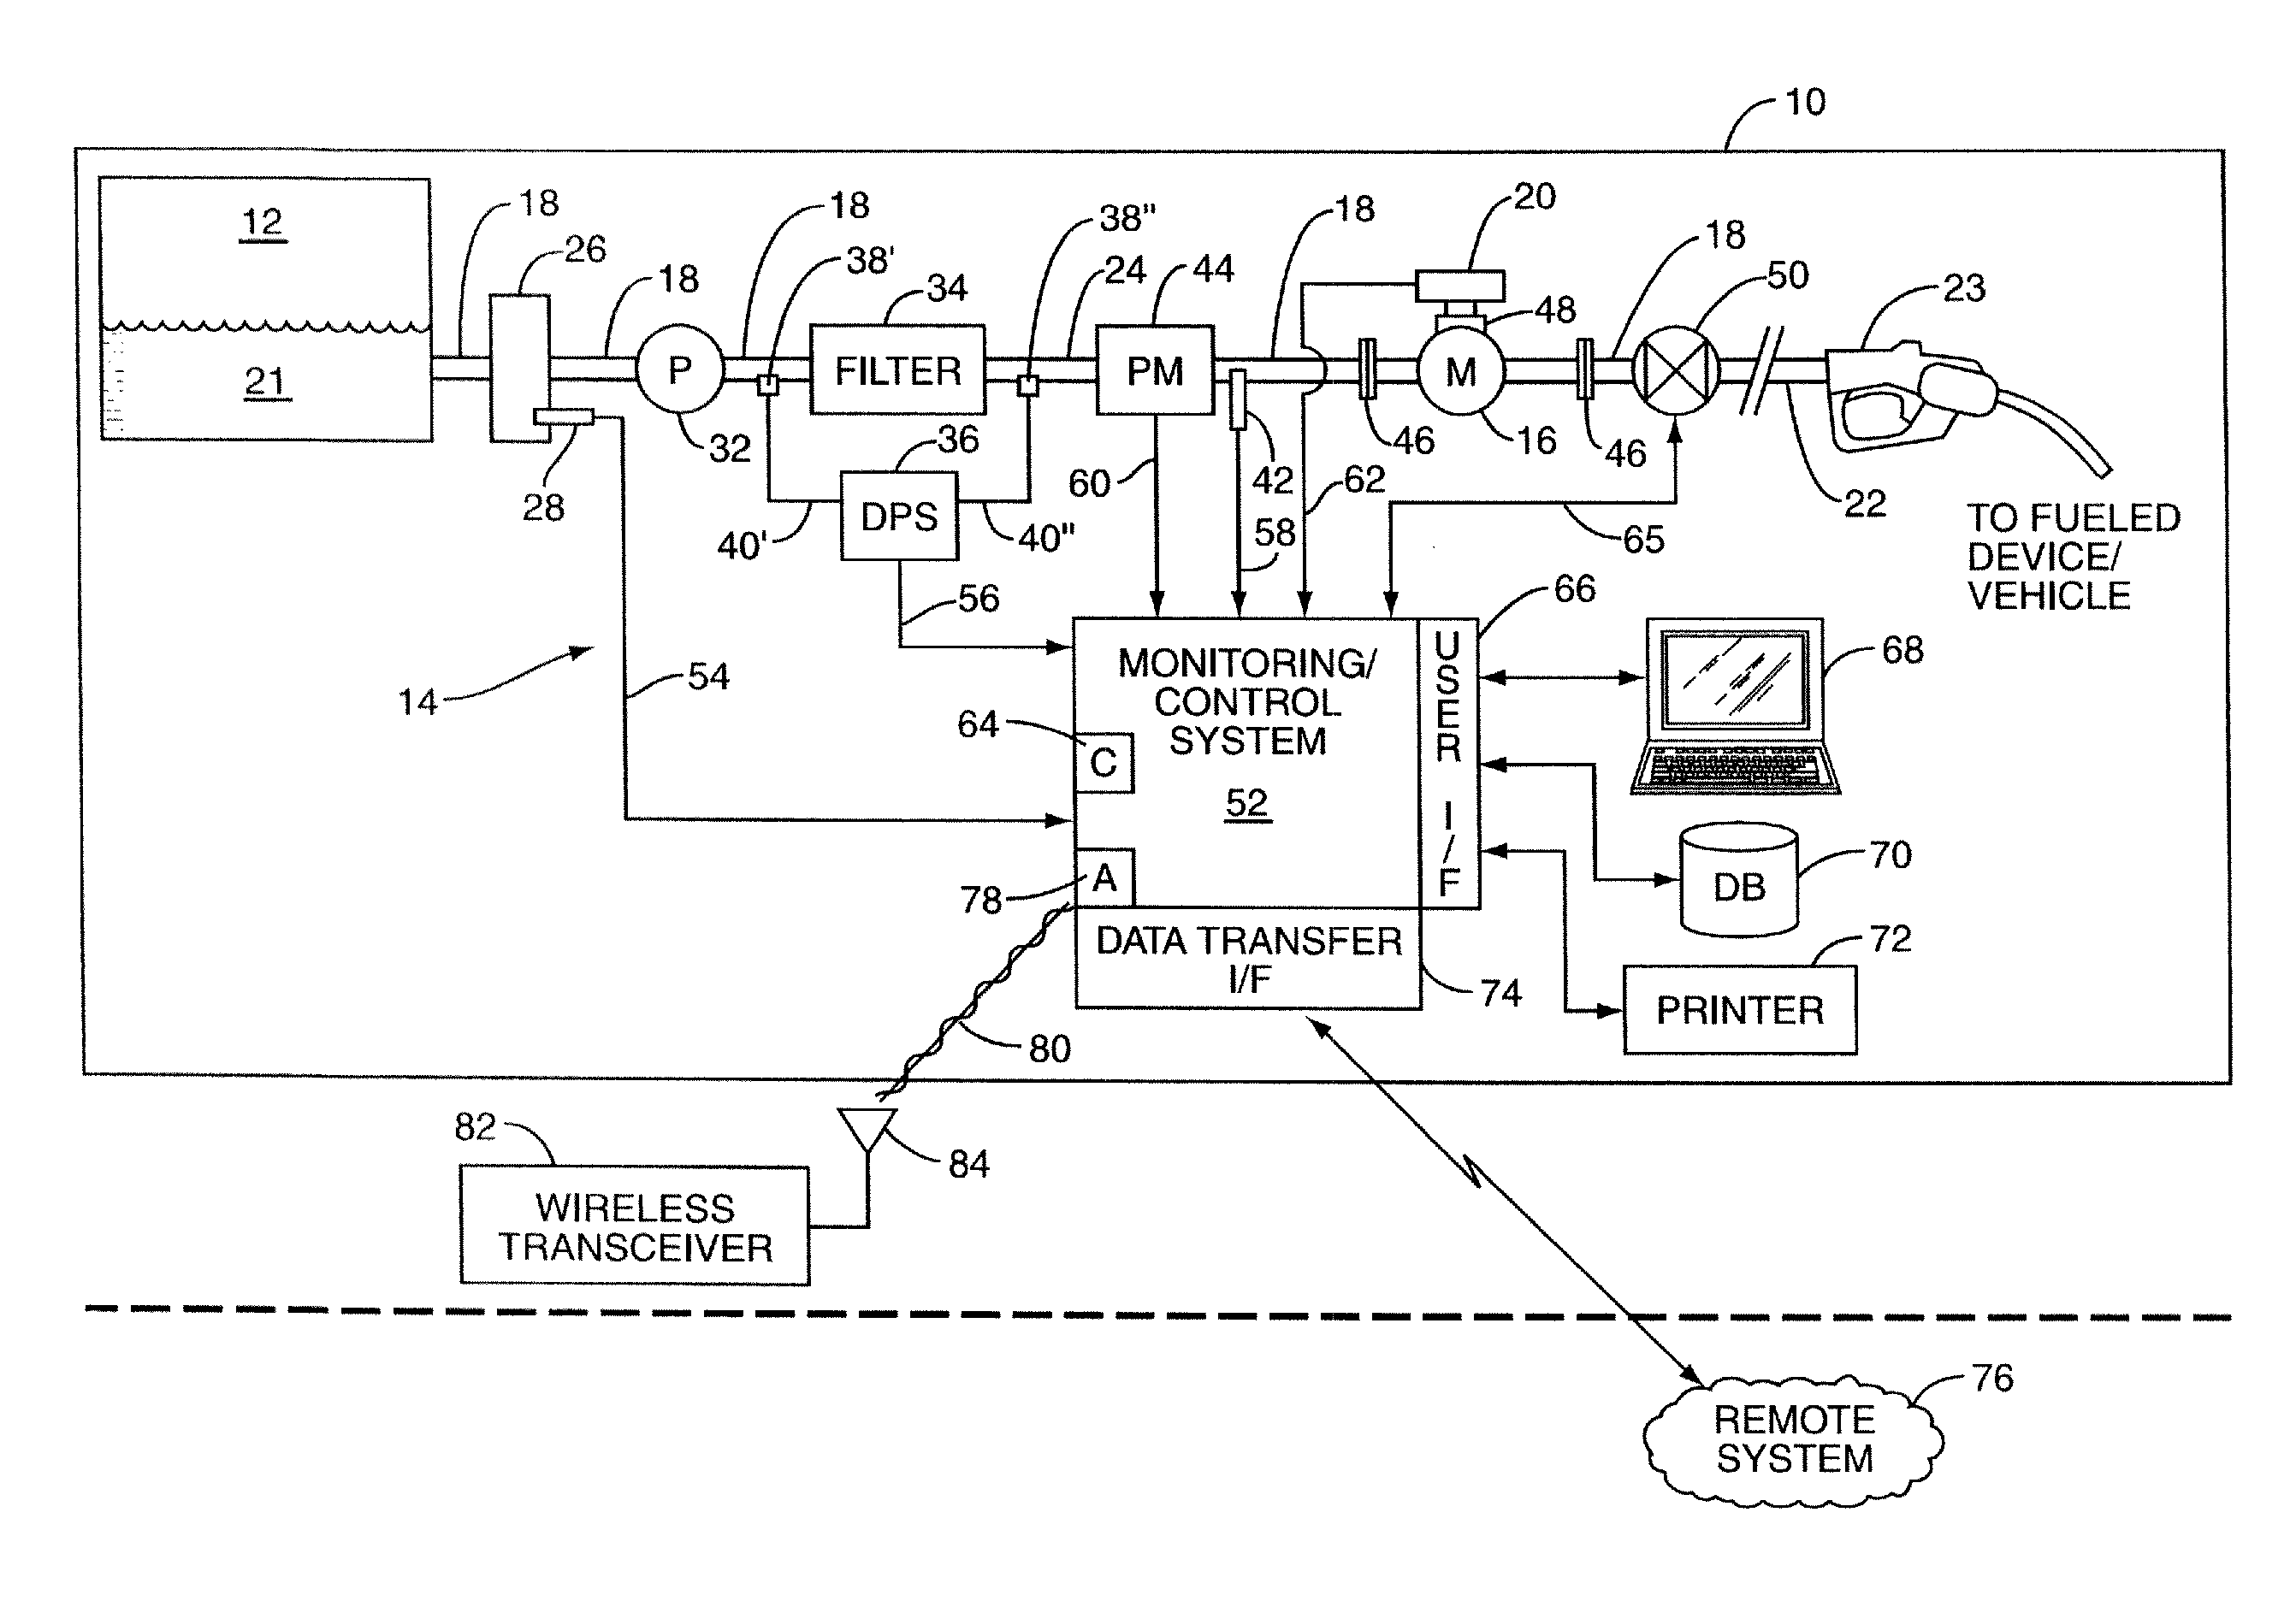 Automated fuel quality detection and dispenser control system and method, particularly for aviation fueling applications